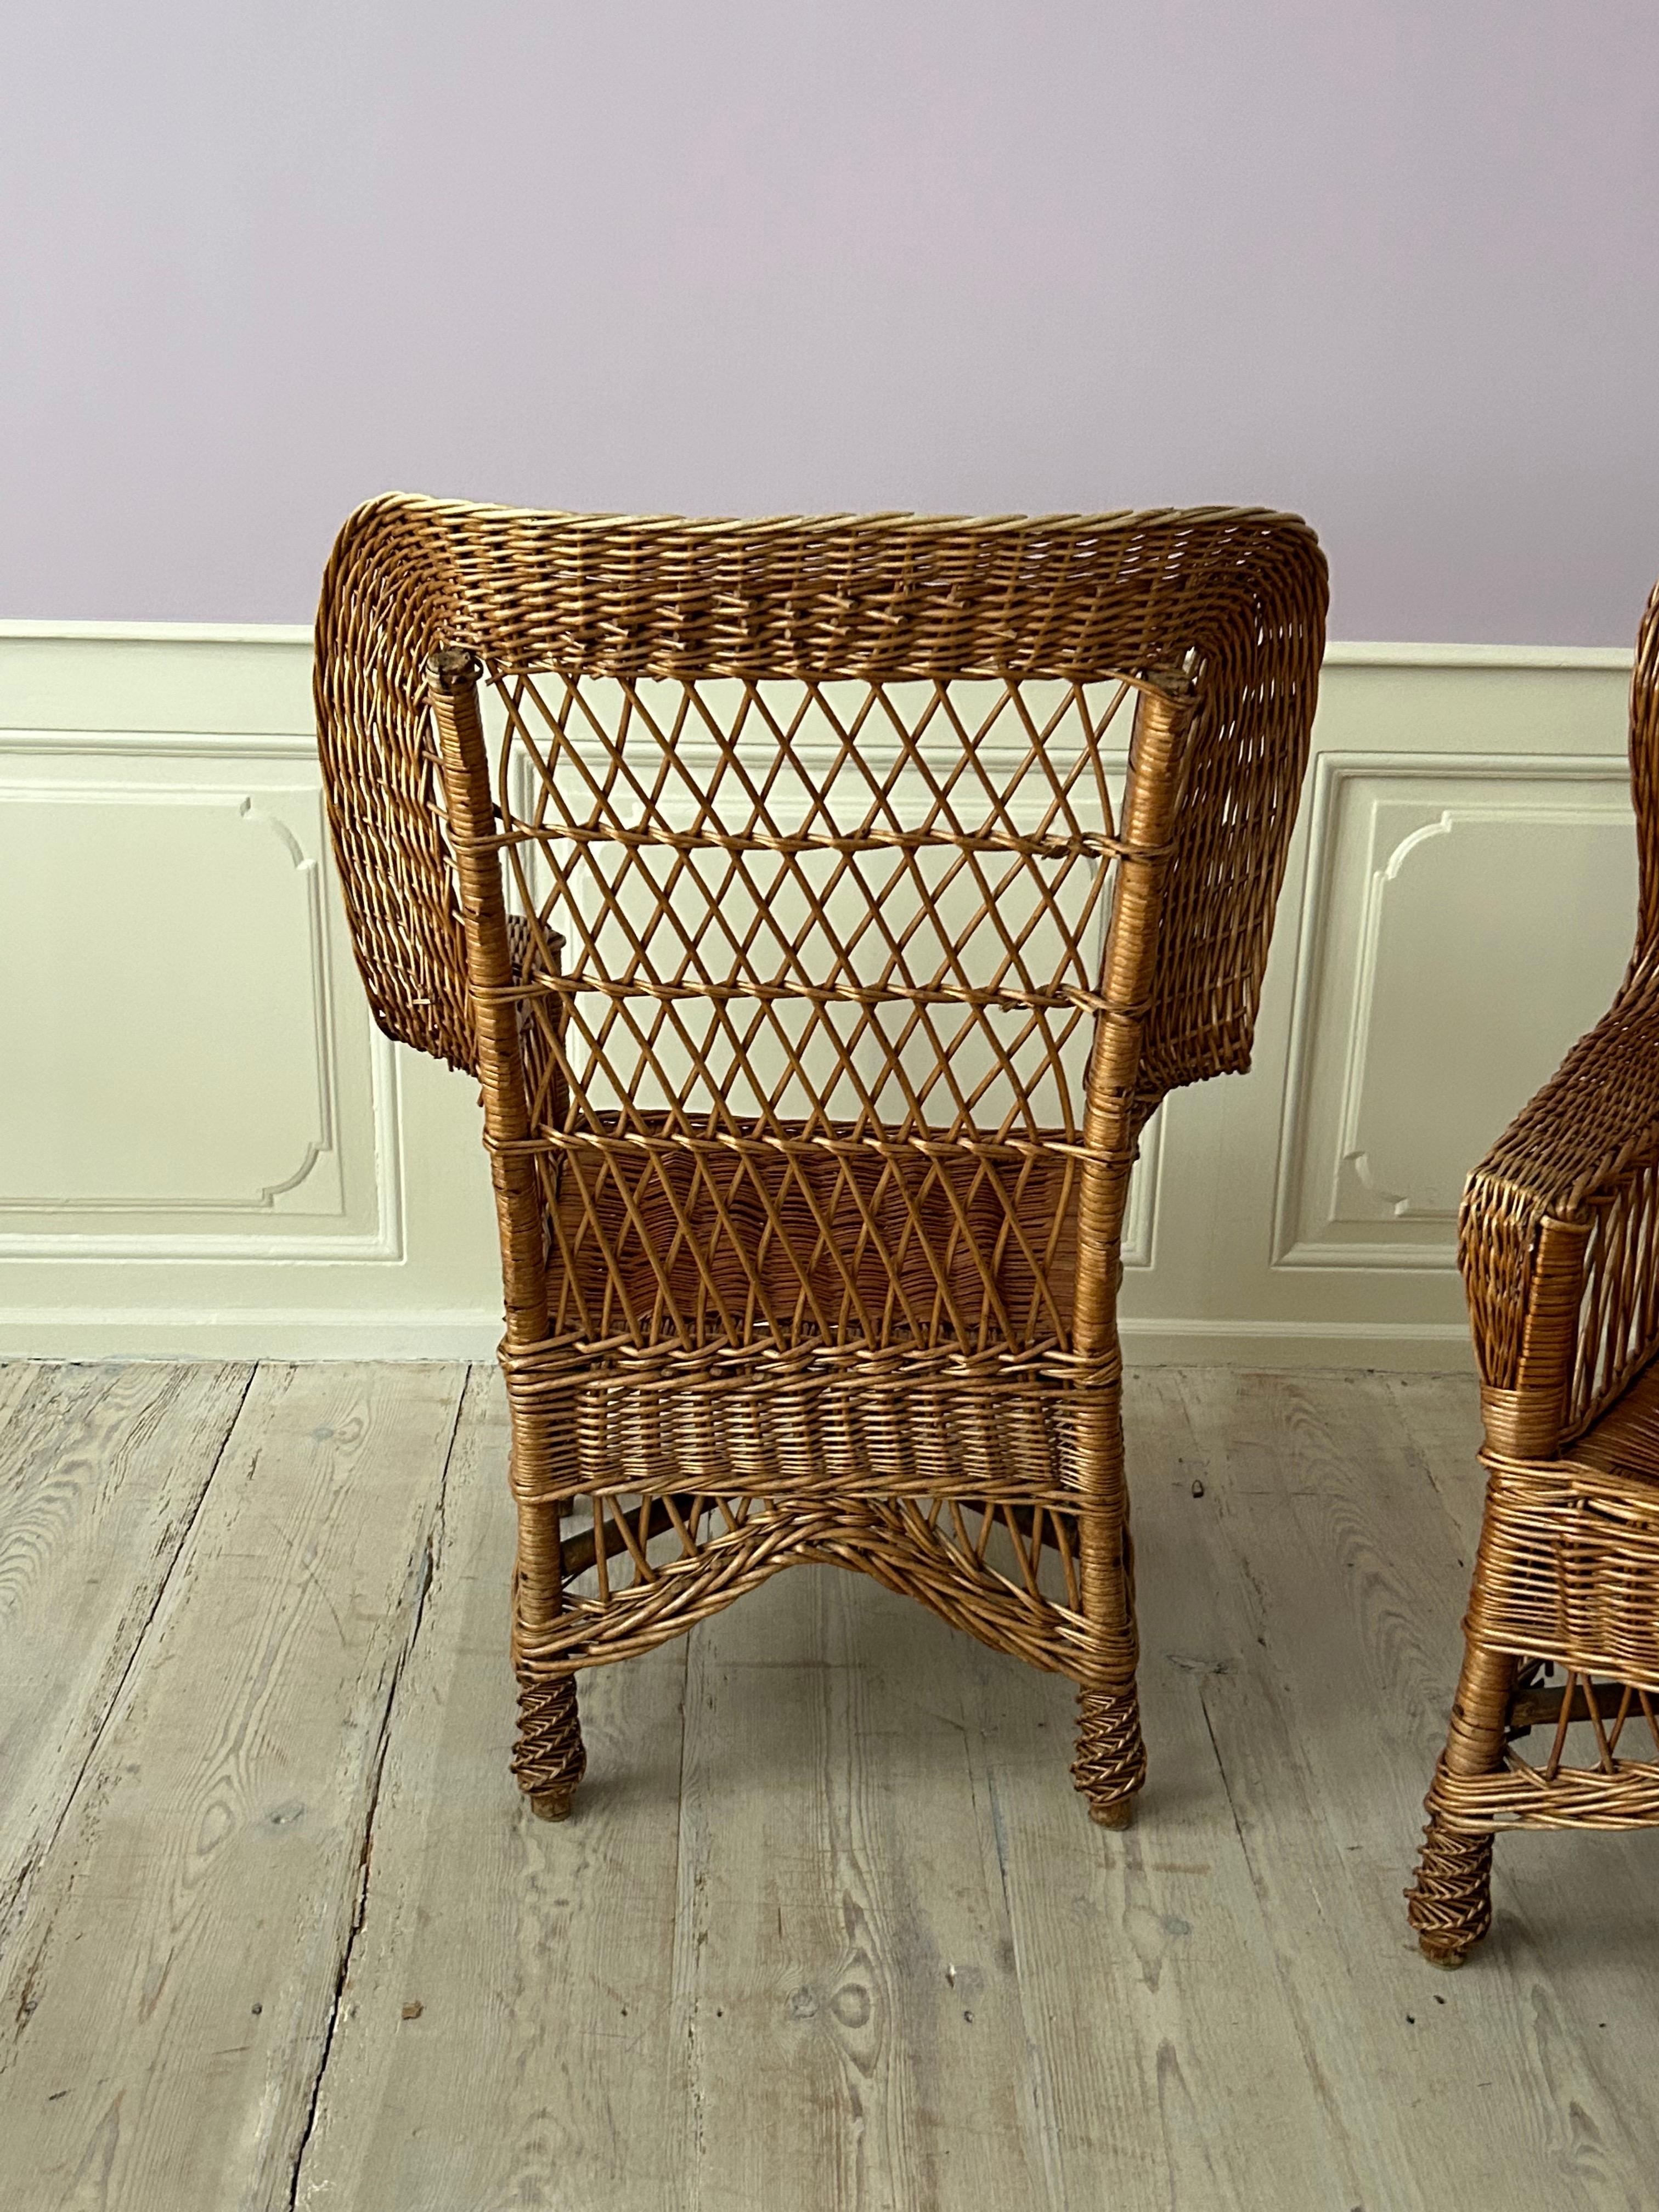 Vintage Pair of Armchairs in Rattan with Decorative Details, France, 1970s For Sale 7